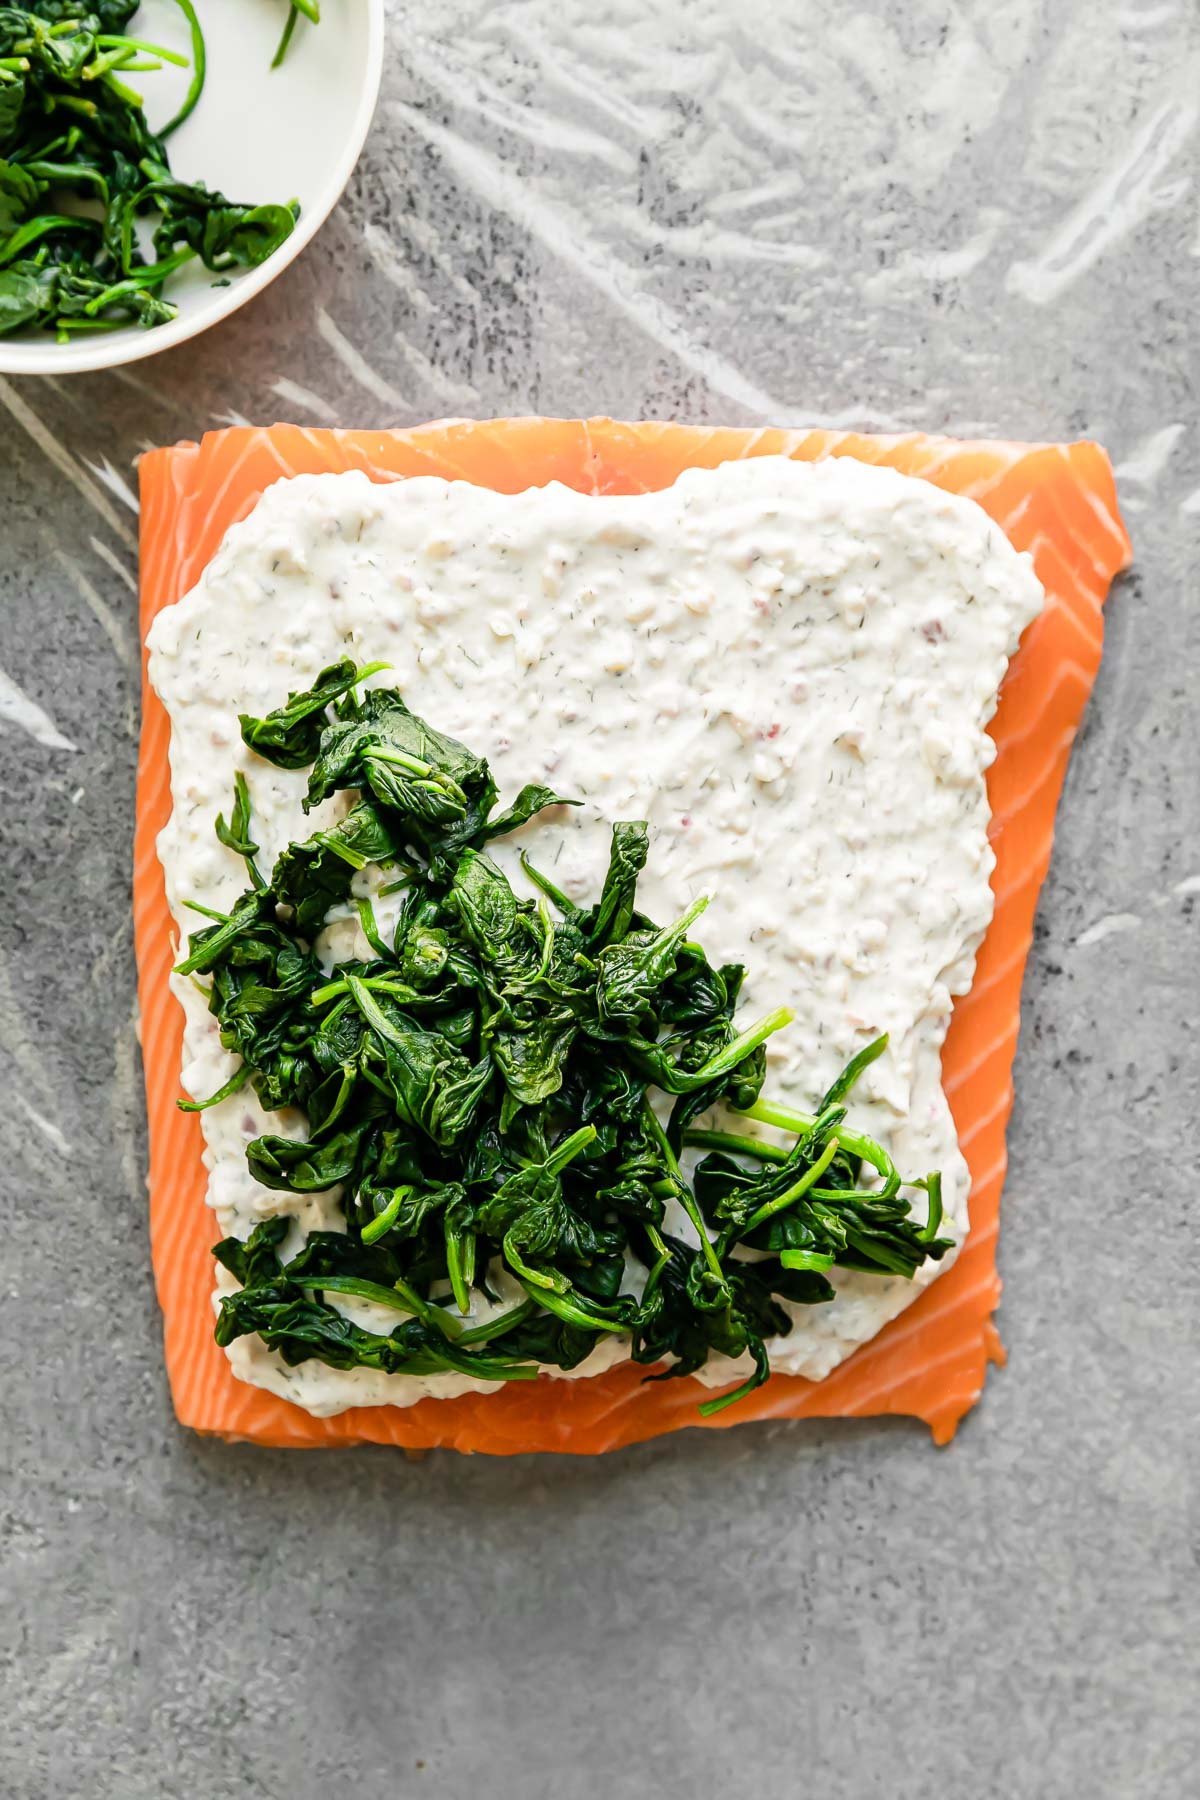 A single salmon fillet sits atop a large piece of plastic wrap. The salmon fillet has been layered with a garlic & dill cream cheese spread and wilted spinach as salmon wellington begins to be built. A small white bowl filled with wilted spinach rests alonside the salmon & both the salmon & the bowl sit atop a light gray textured surface.